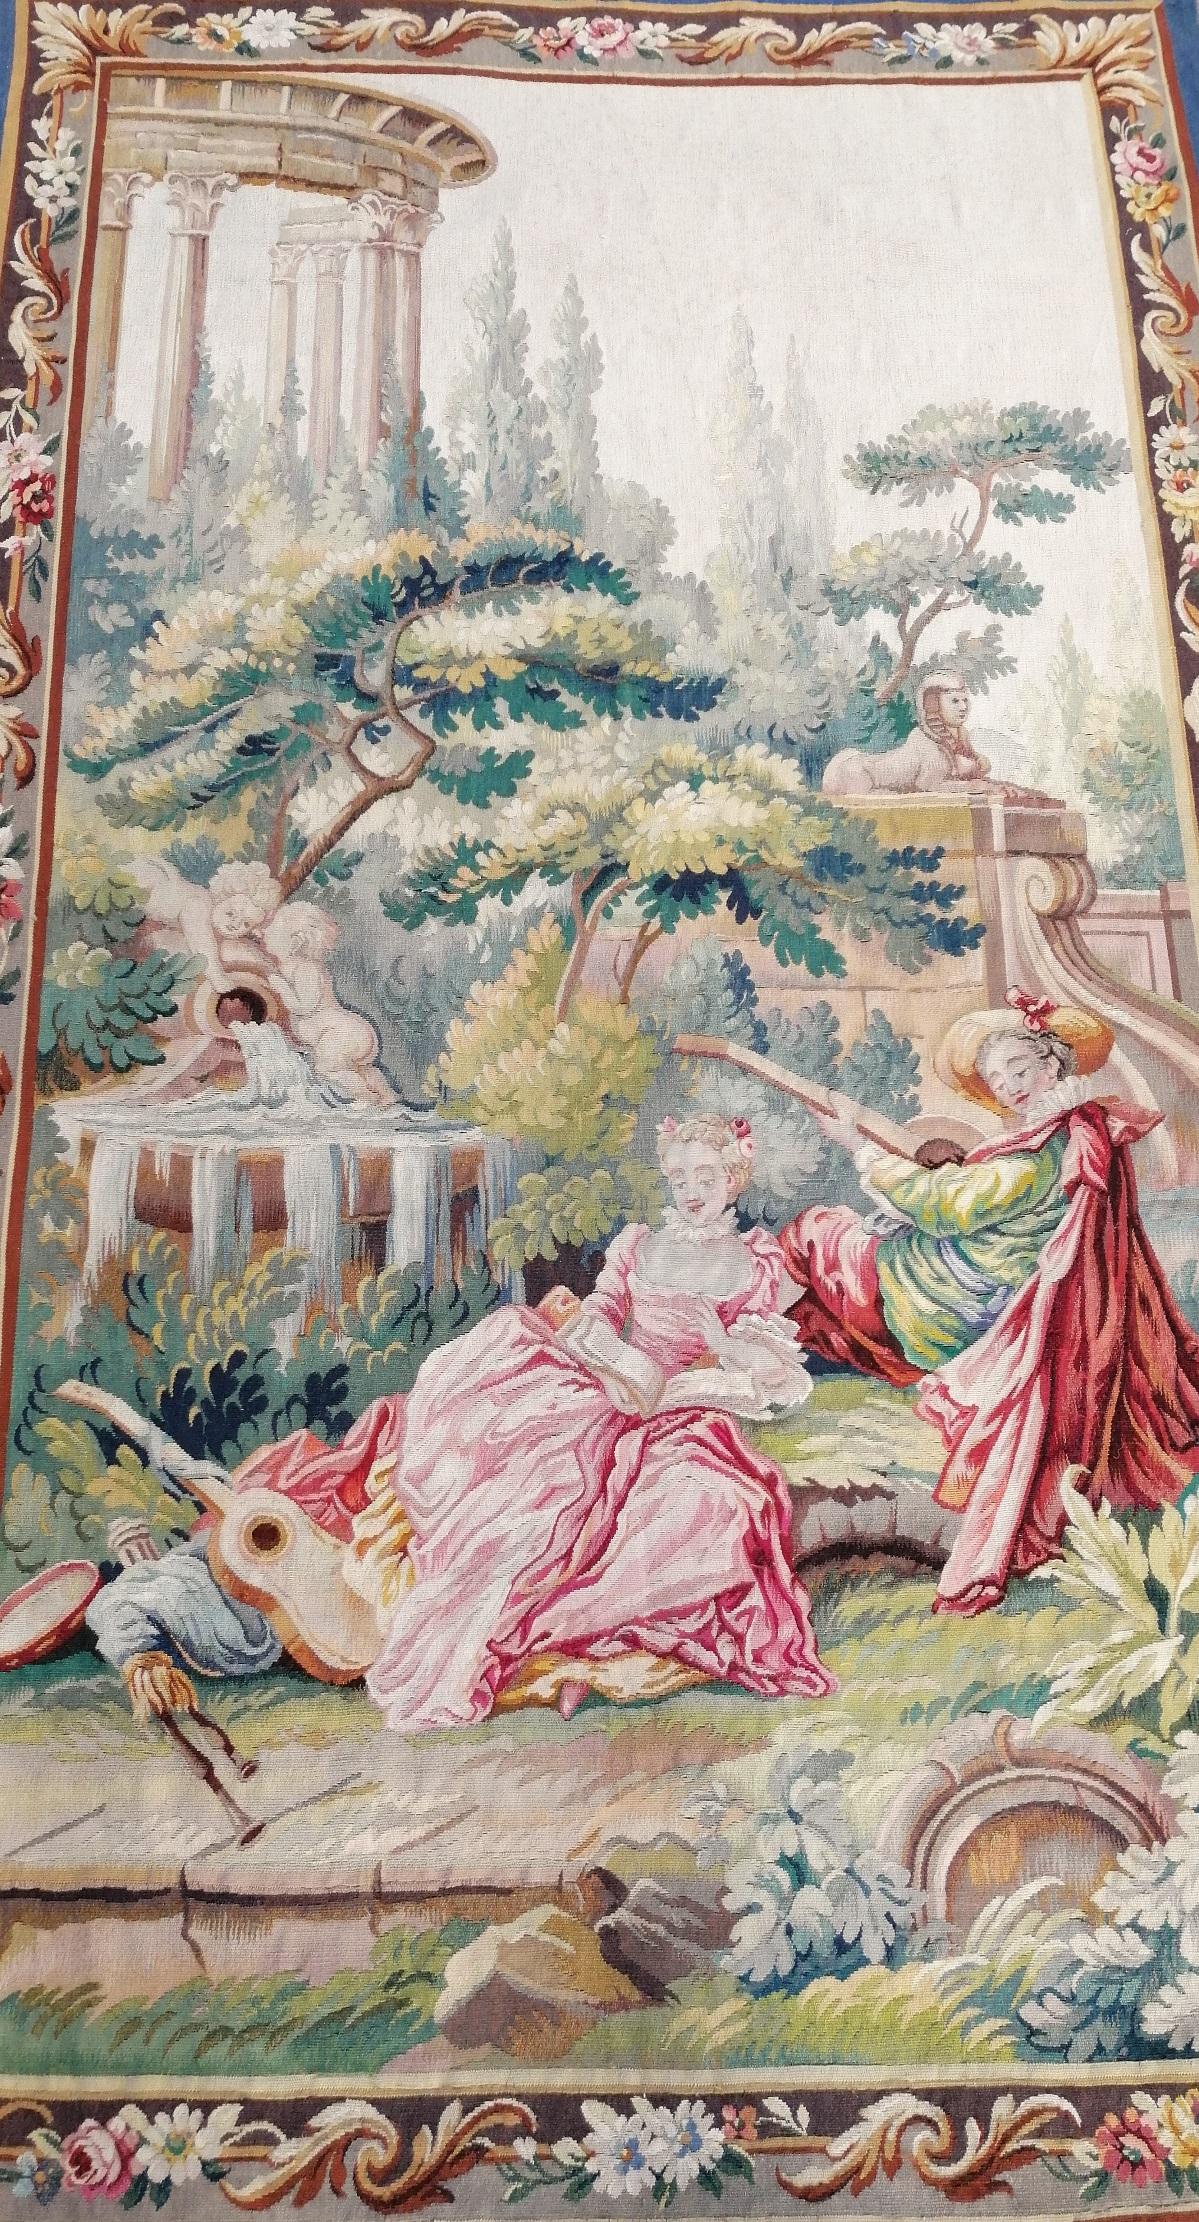  19th Century Aubusson Tapestry - N° 1060 For Sale 3